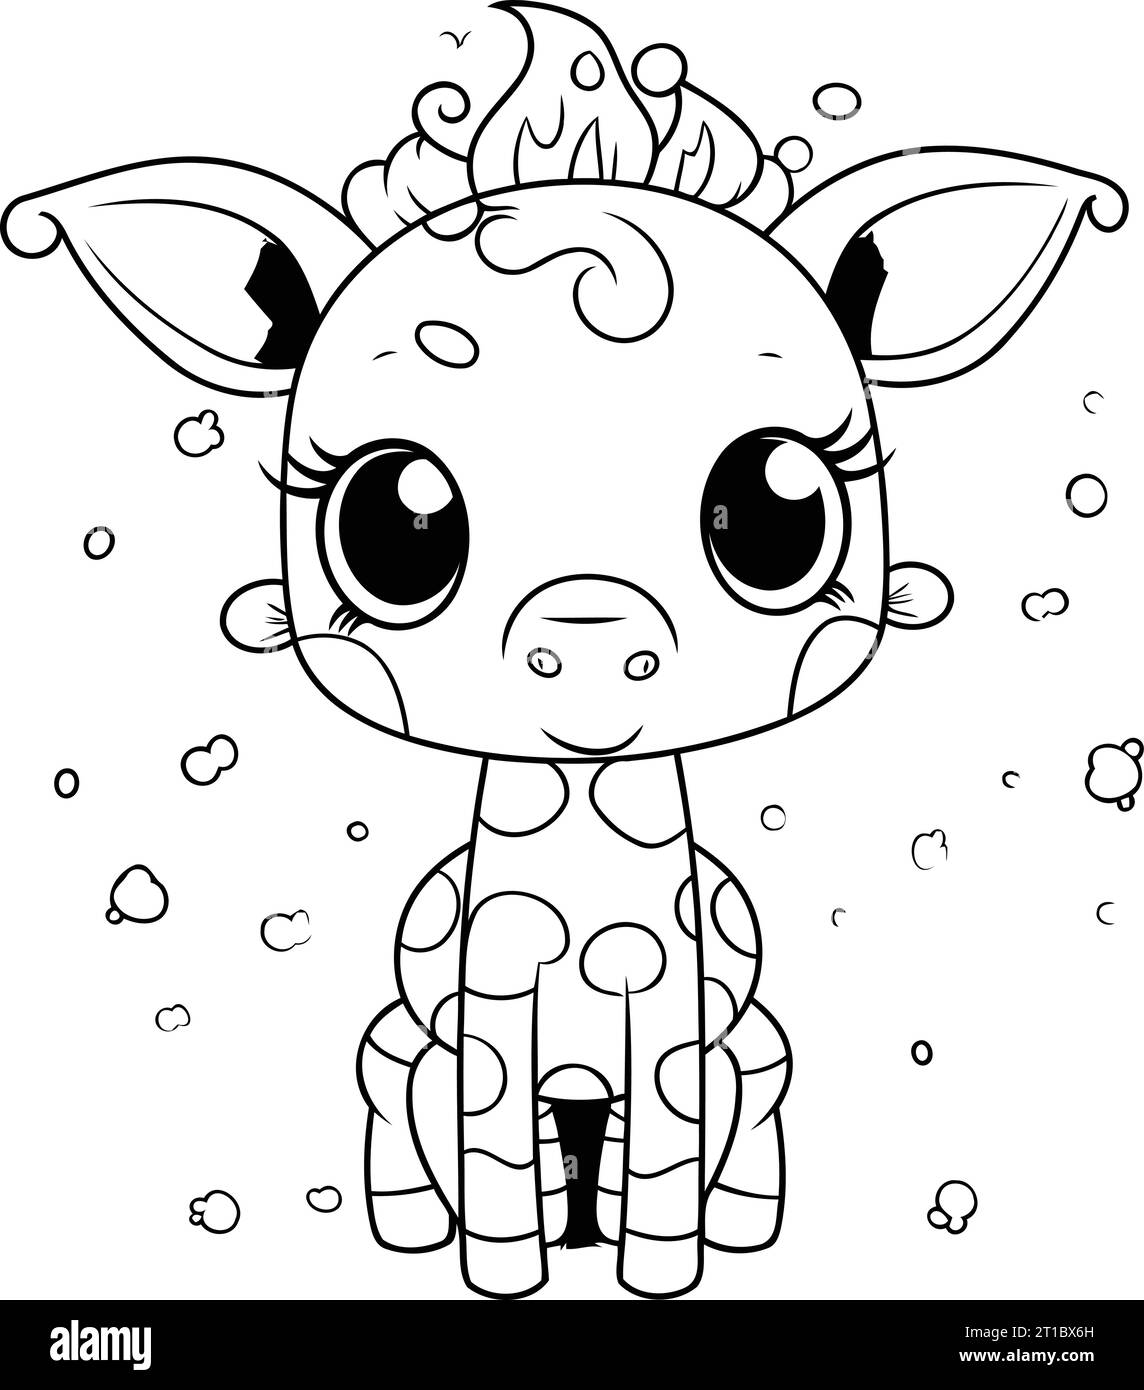 Coloring Page Outline Of Cute Baby Giraffe Vector Illustration Stock Vector